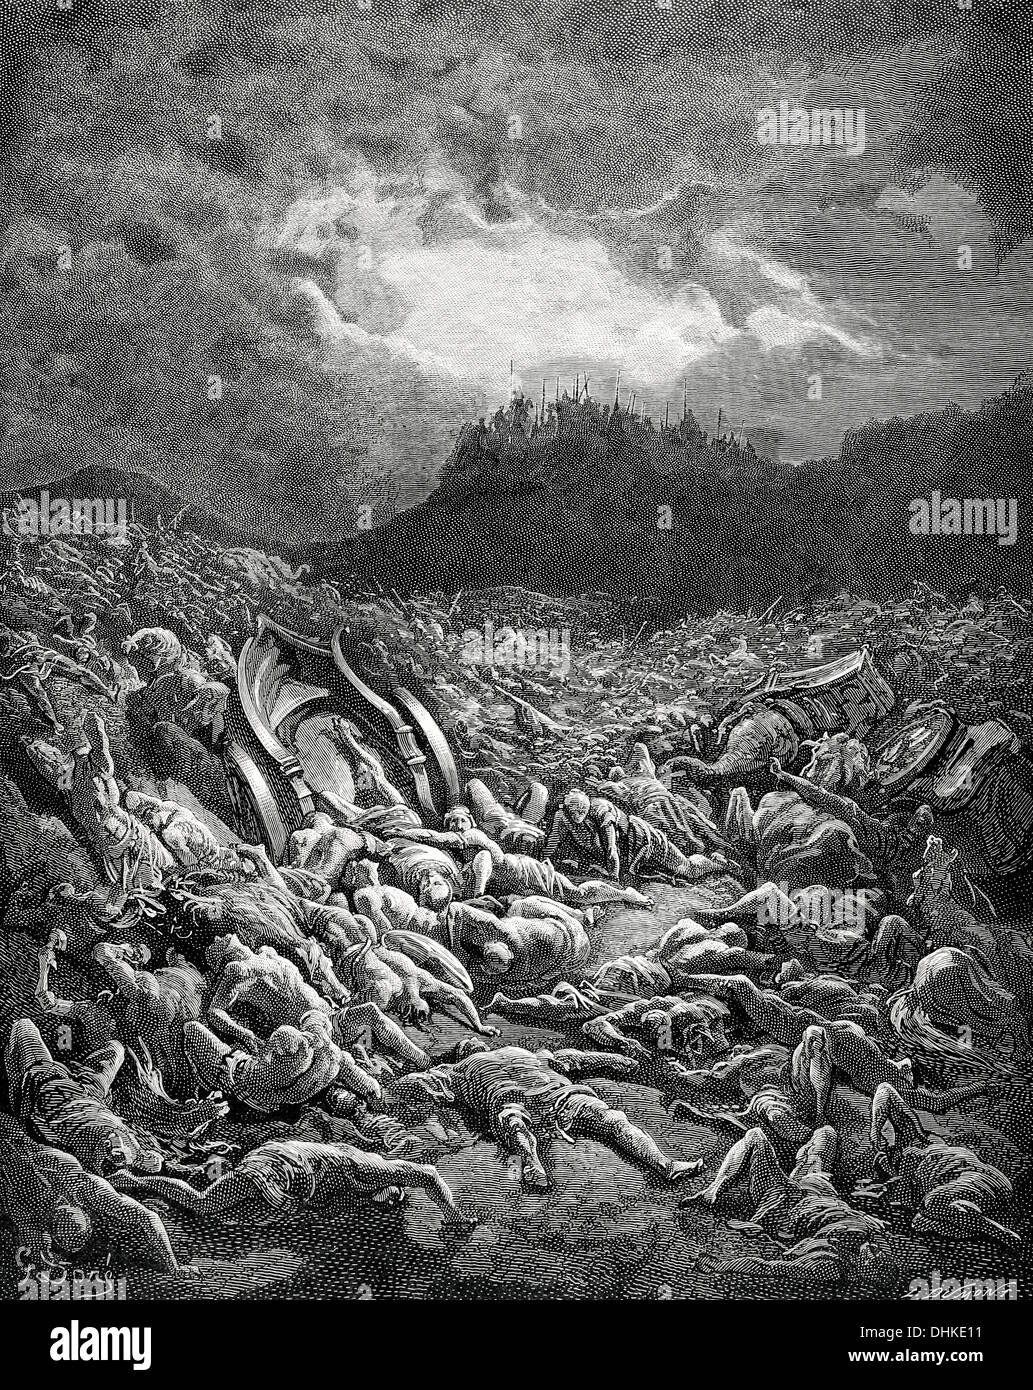 The Destruction of the Armies of the Ammonites and Moabites. Dore Bible illustrations. 19th century. Engraving. Stock Photo